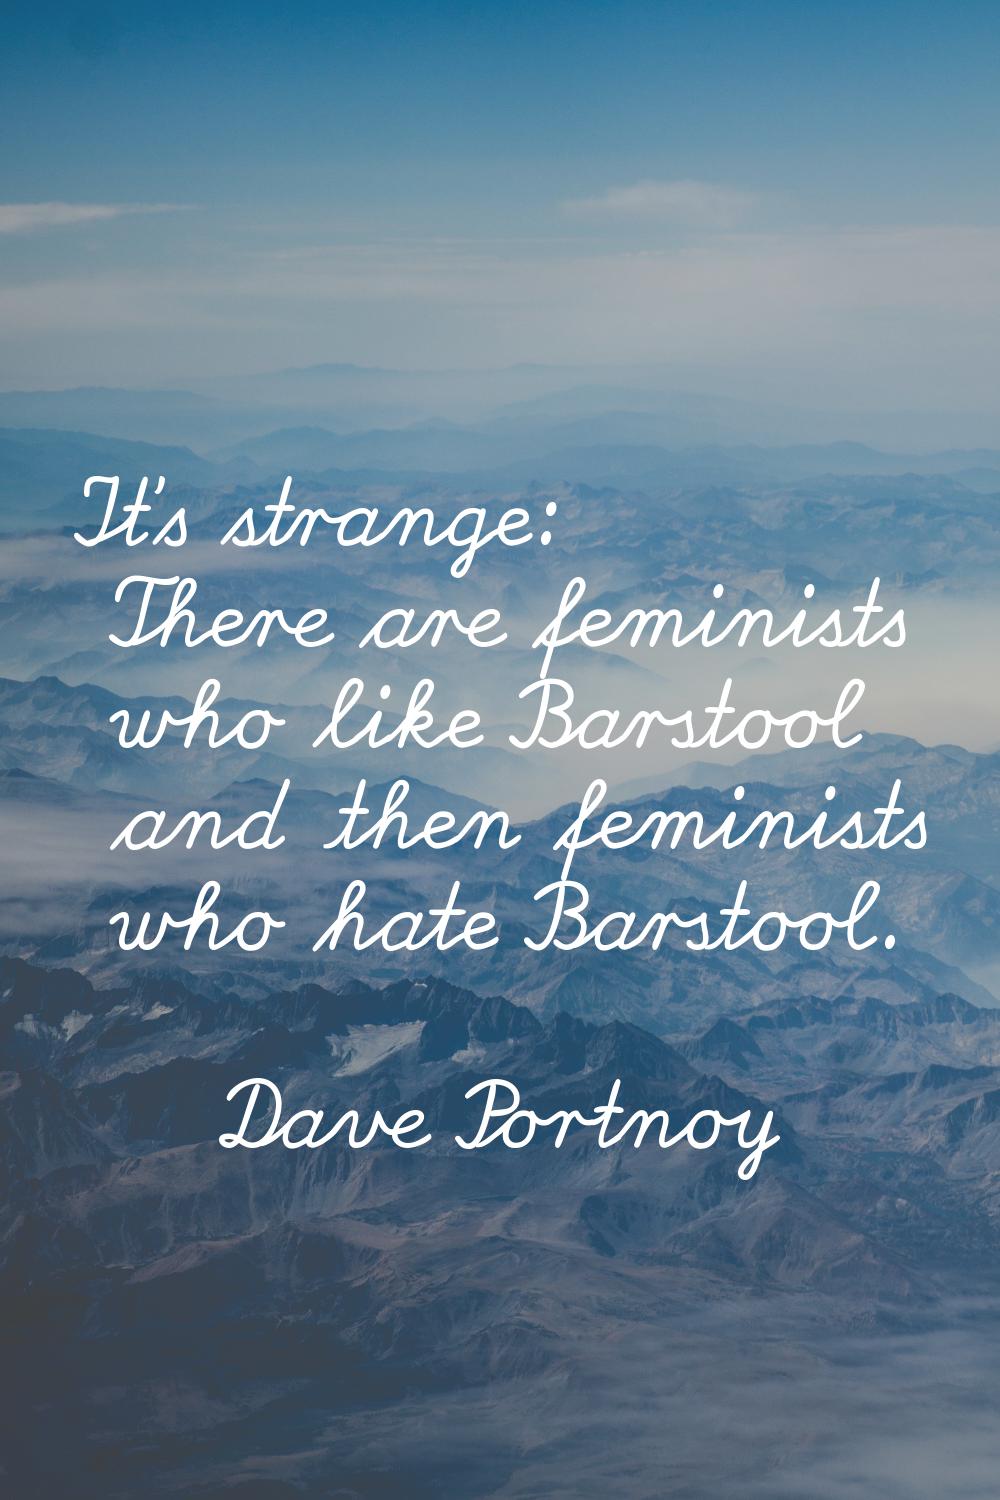 It's strange: There are feminists who like Barstool and then feminists who hate Barstool.